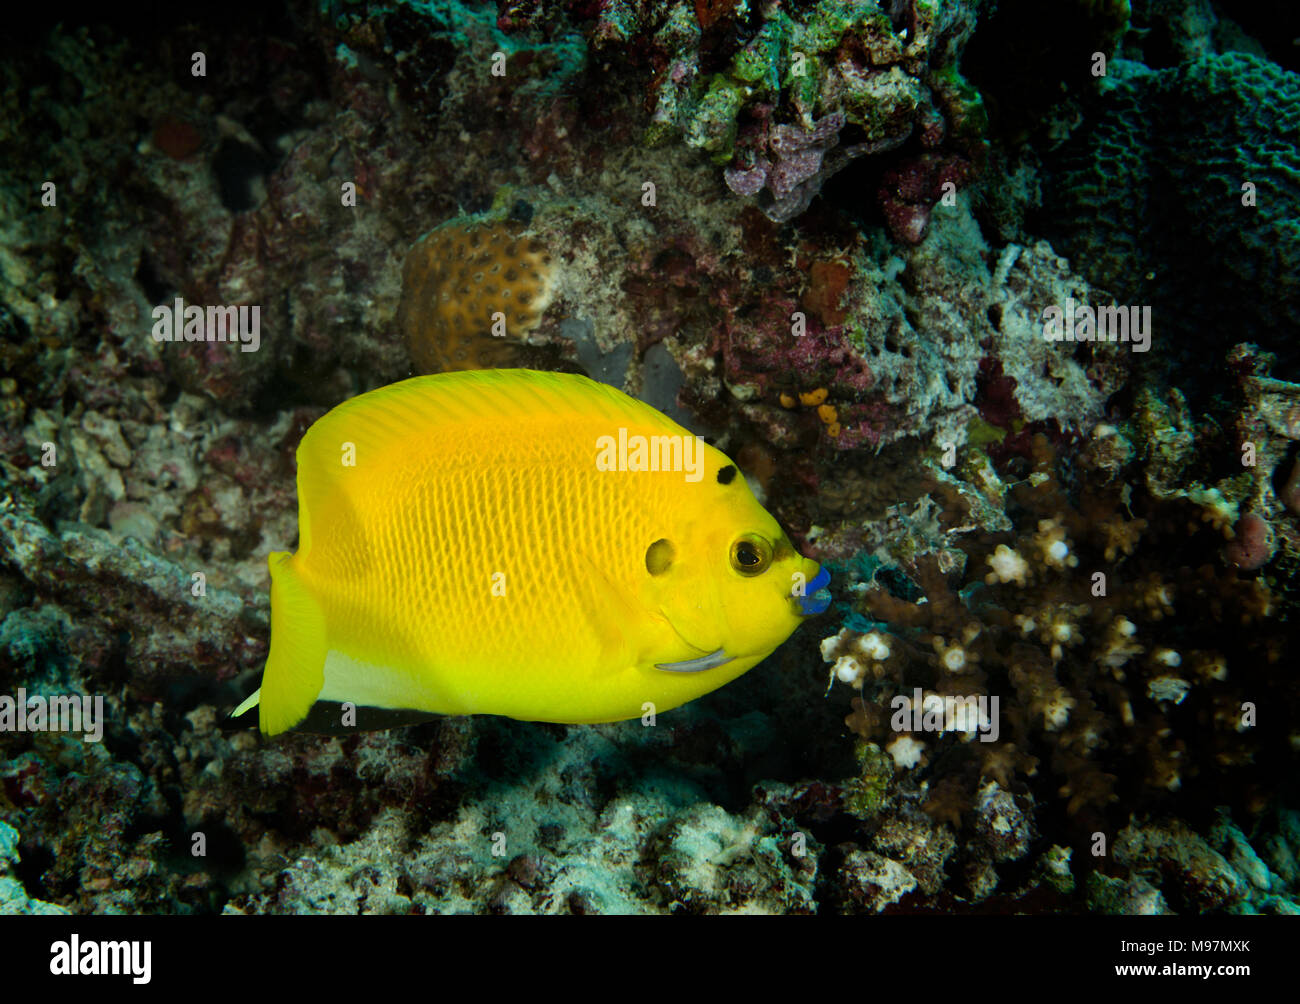 Three-spot angelfish, Apolemichthys trimaculatus, underwater in Bathala, Maldives, in the indian ocean Stock Photo